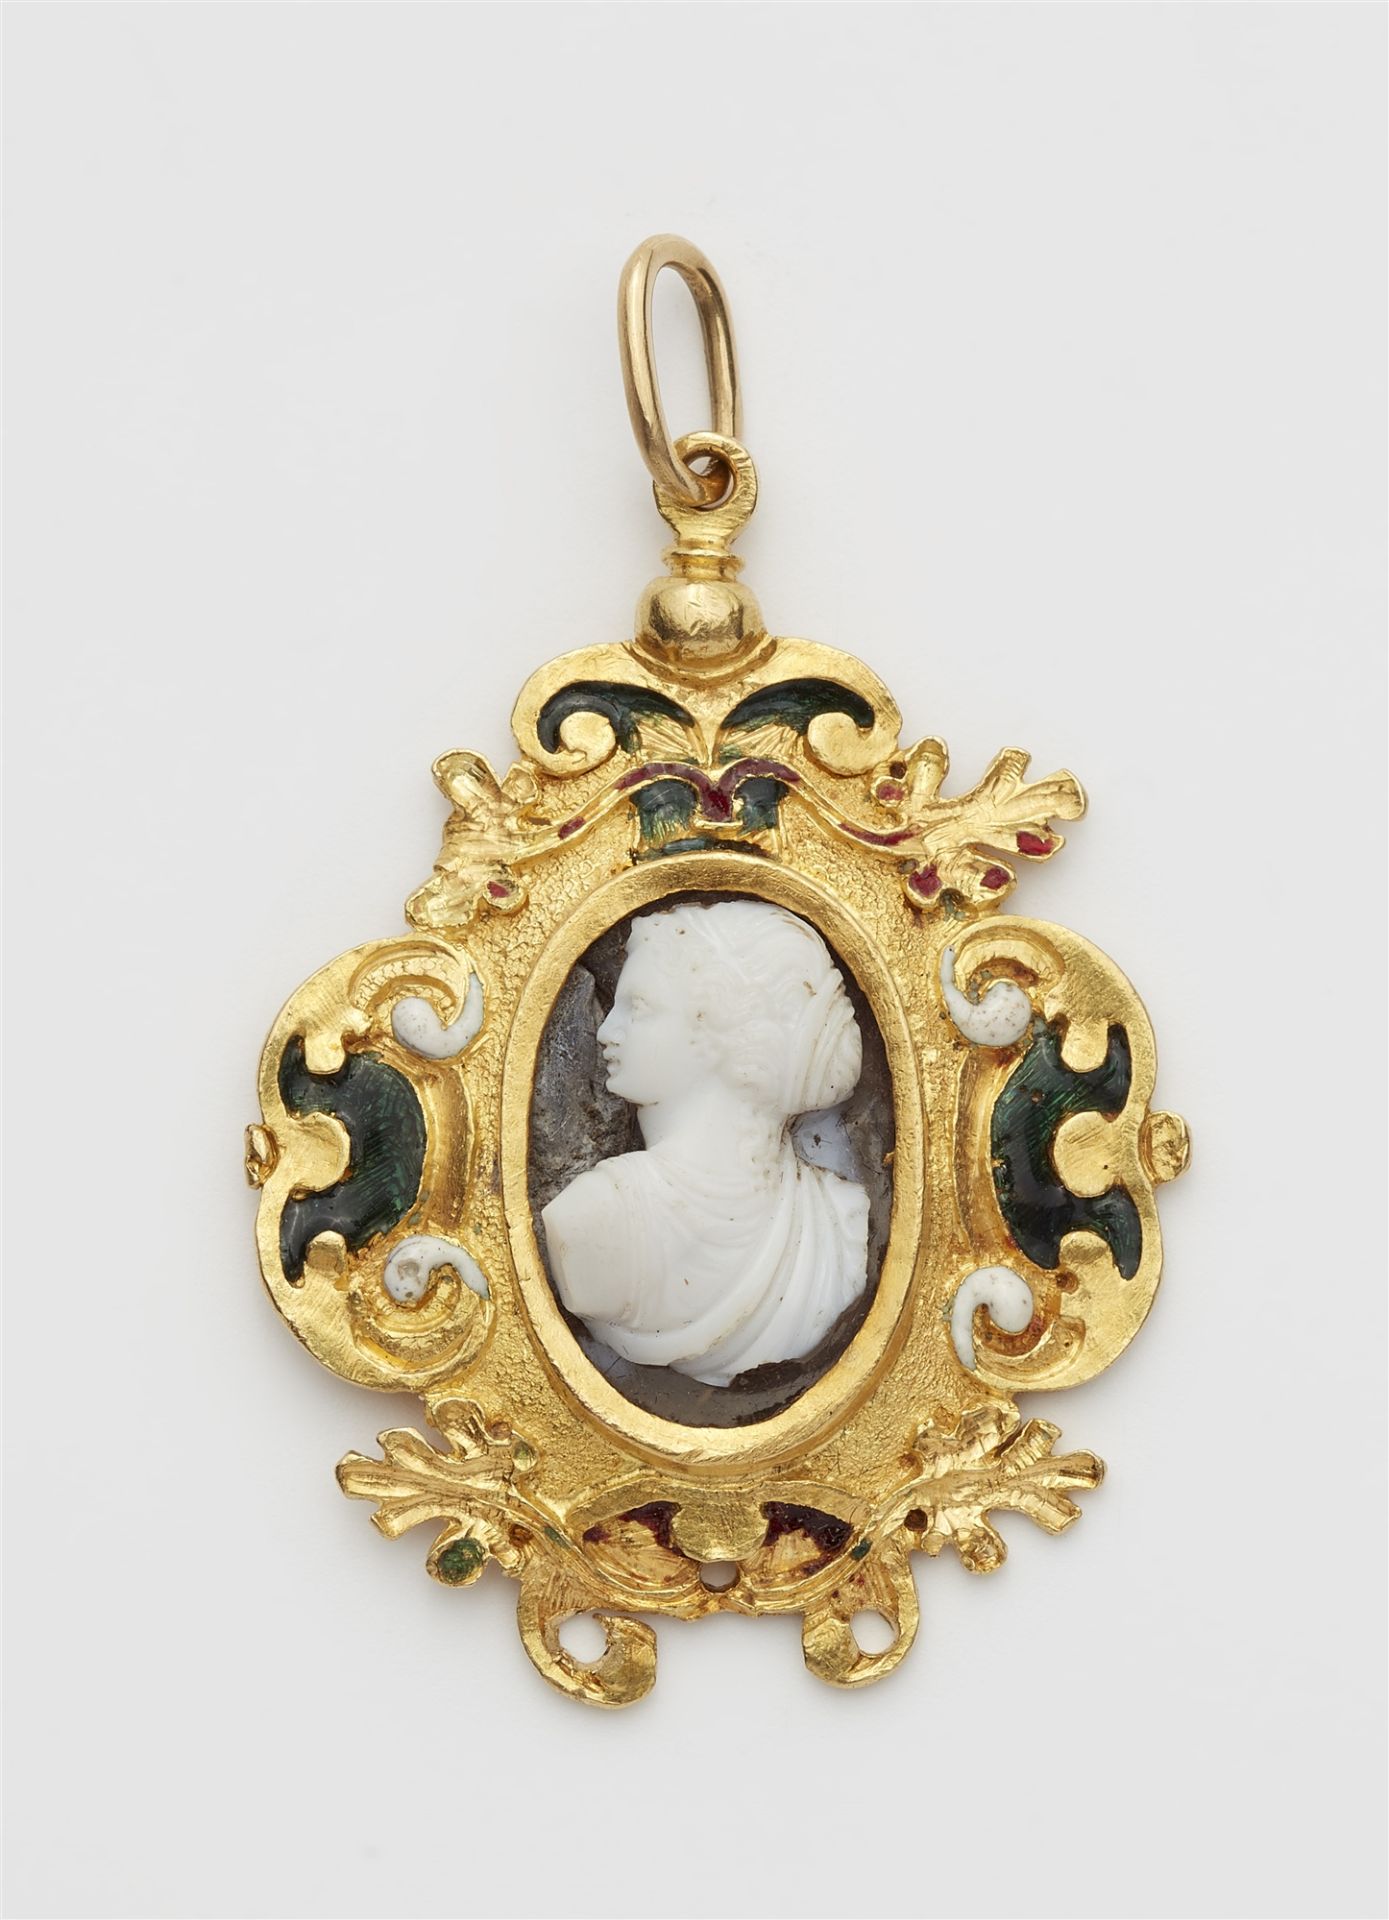 An 18k gold and enamel cartouche frame pendant with a probably Italian , Renaissance layered chalced